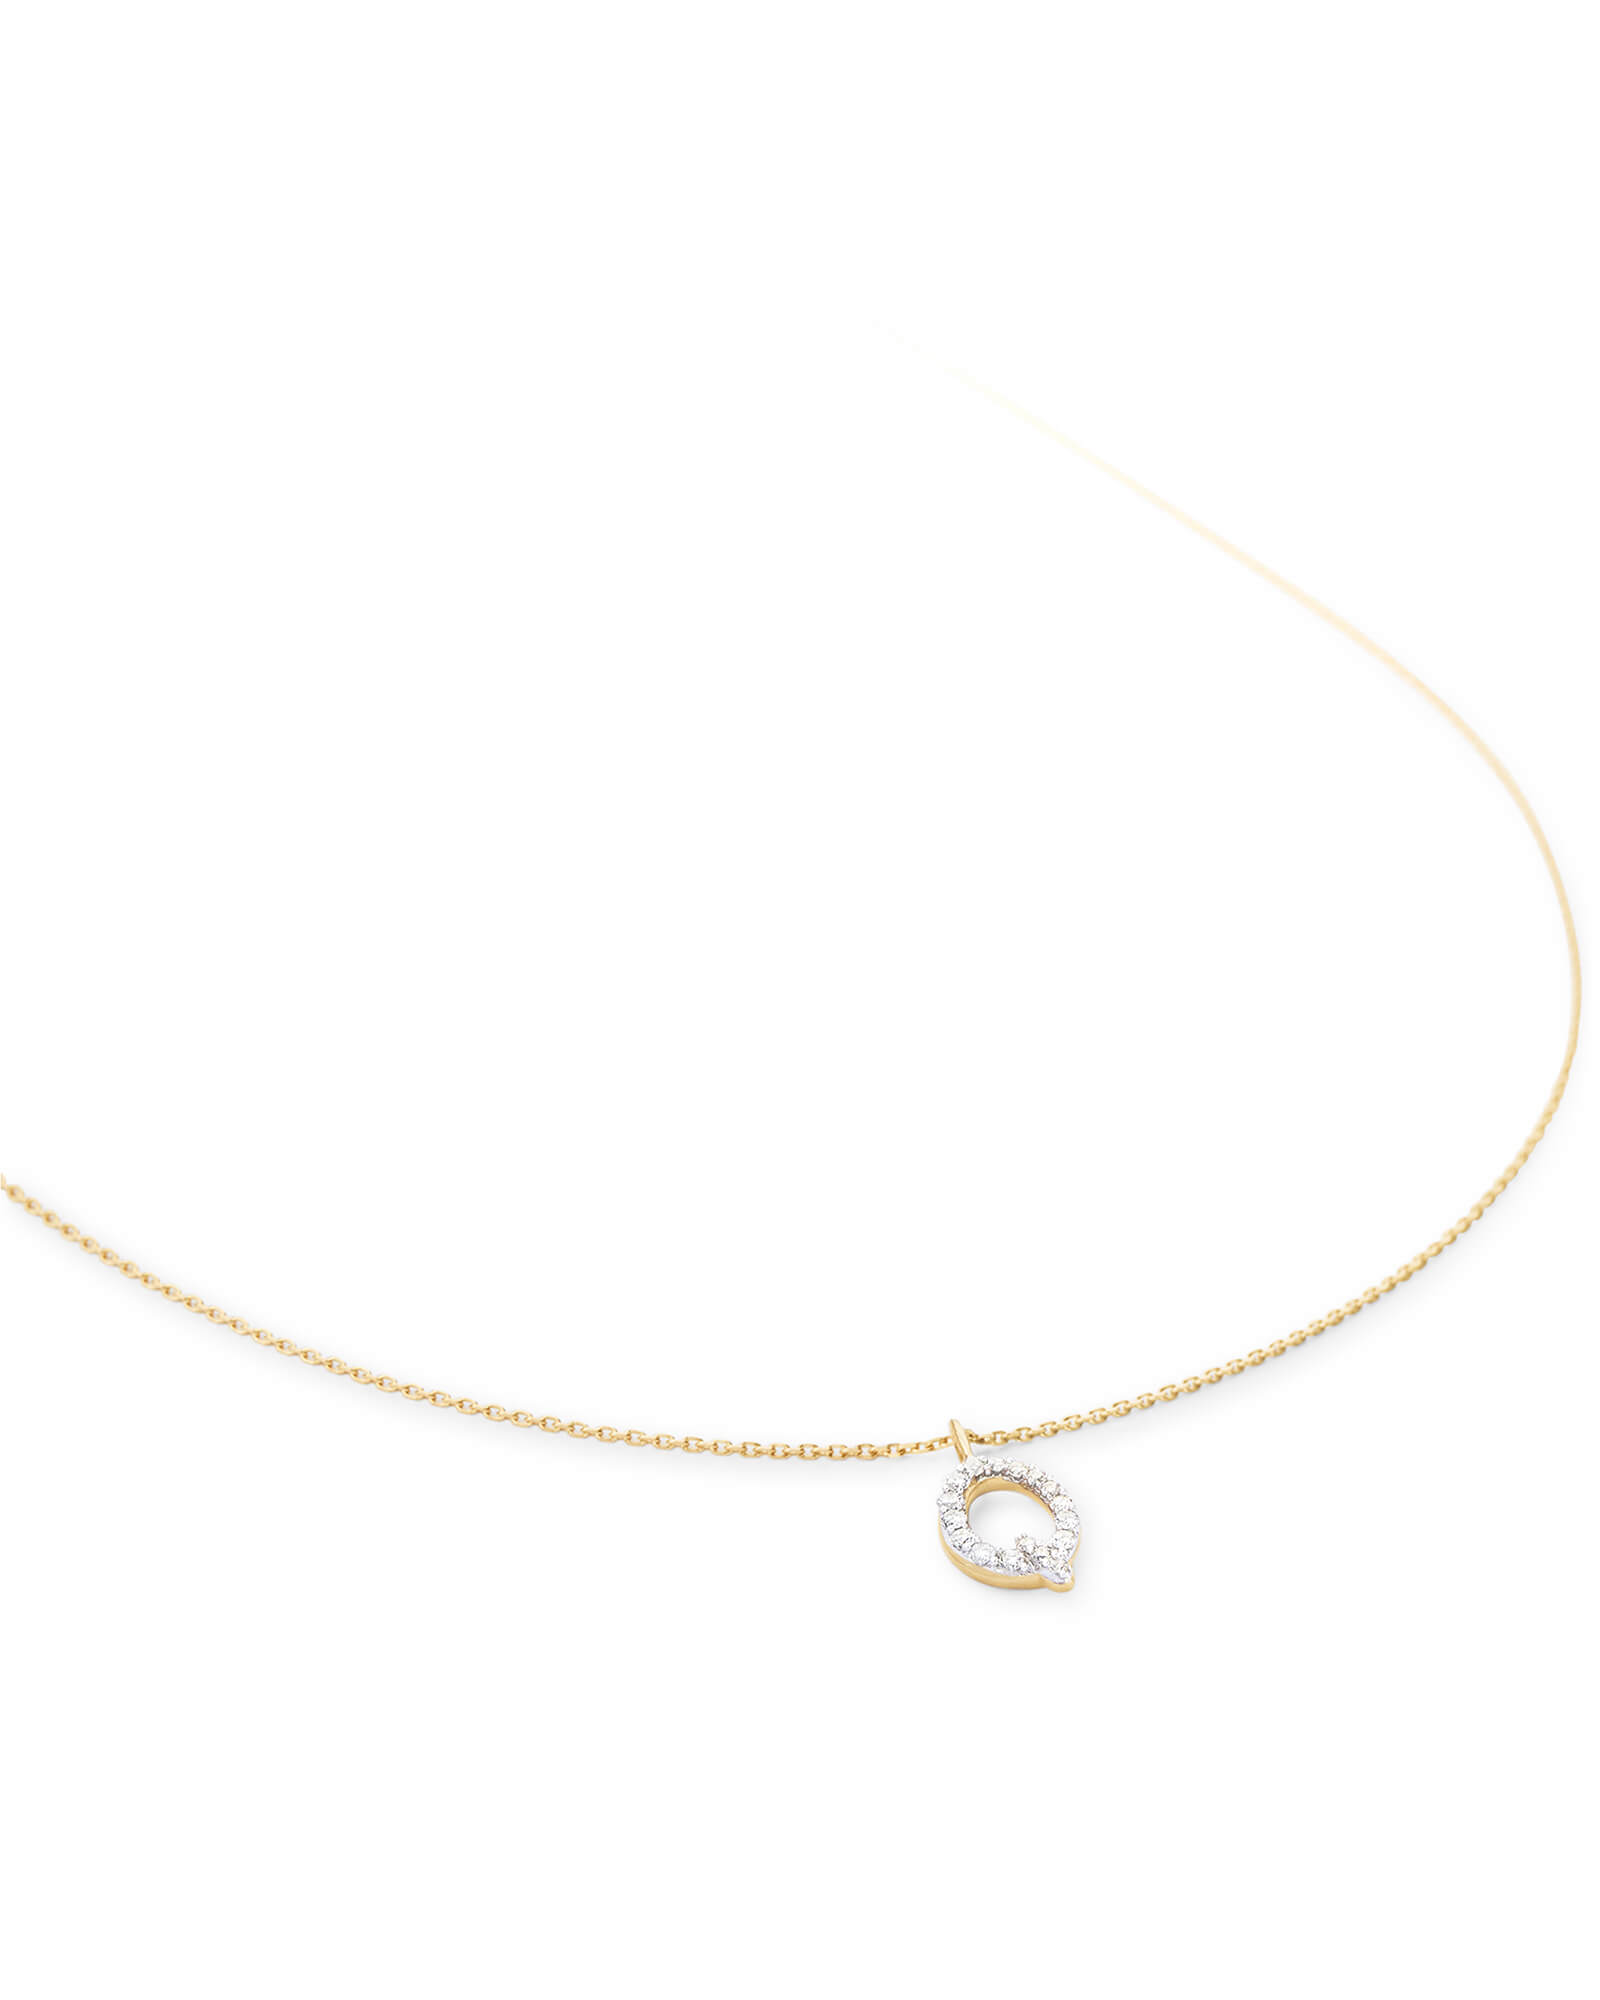 Diamond Letter Q Pendant Necklace in 14k Yellow Gold